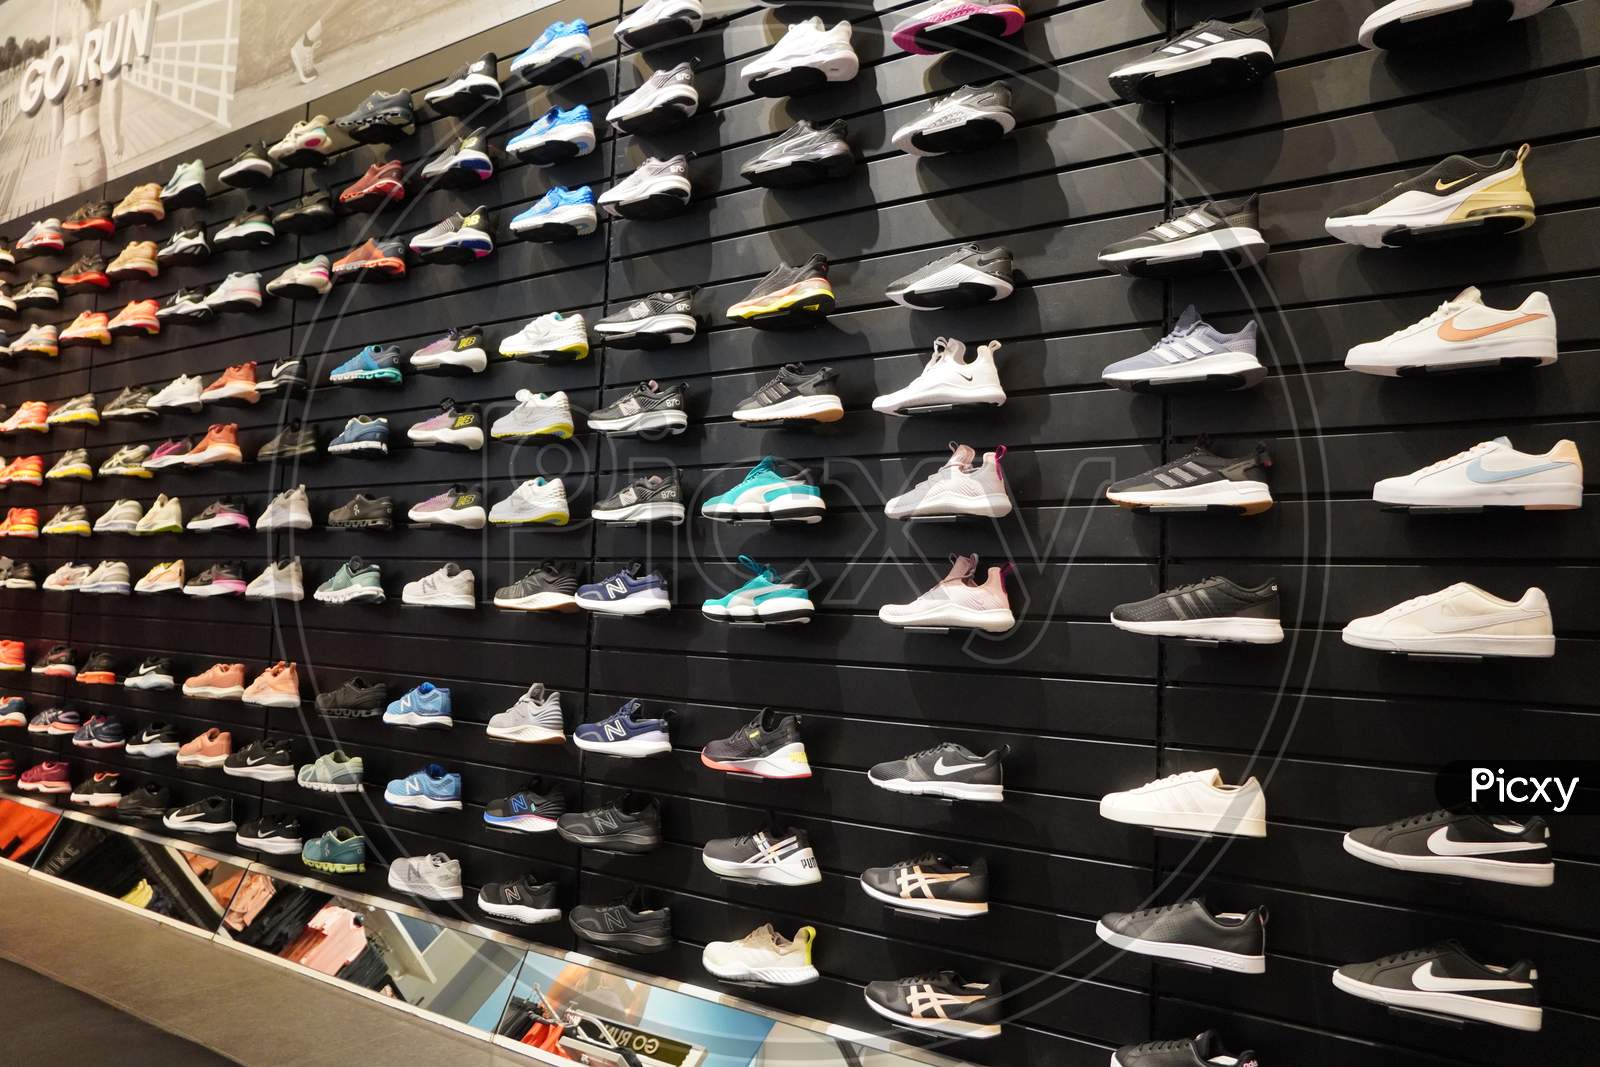 Shop Display Of A Lot Of Sports Shoes On A Wall. A View Of A Wall Of Shoes Inside The Store. Modern New Stylish Sneakers Running Shoes For Men And Women.